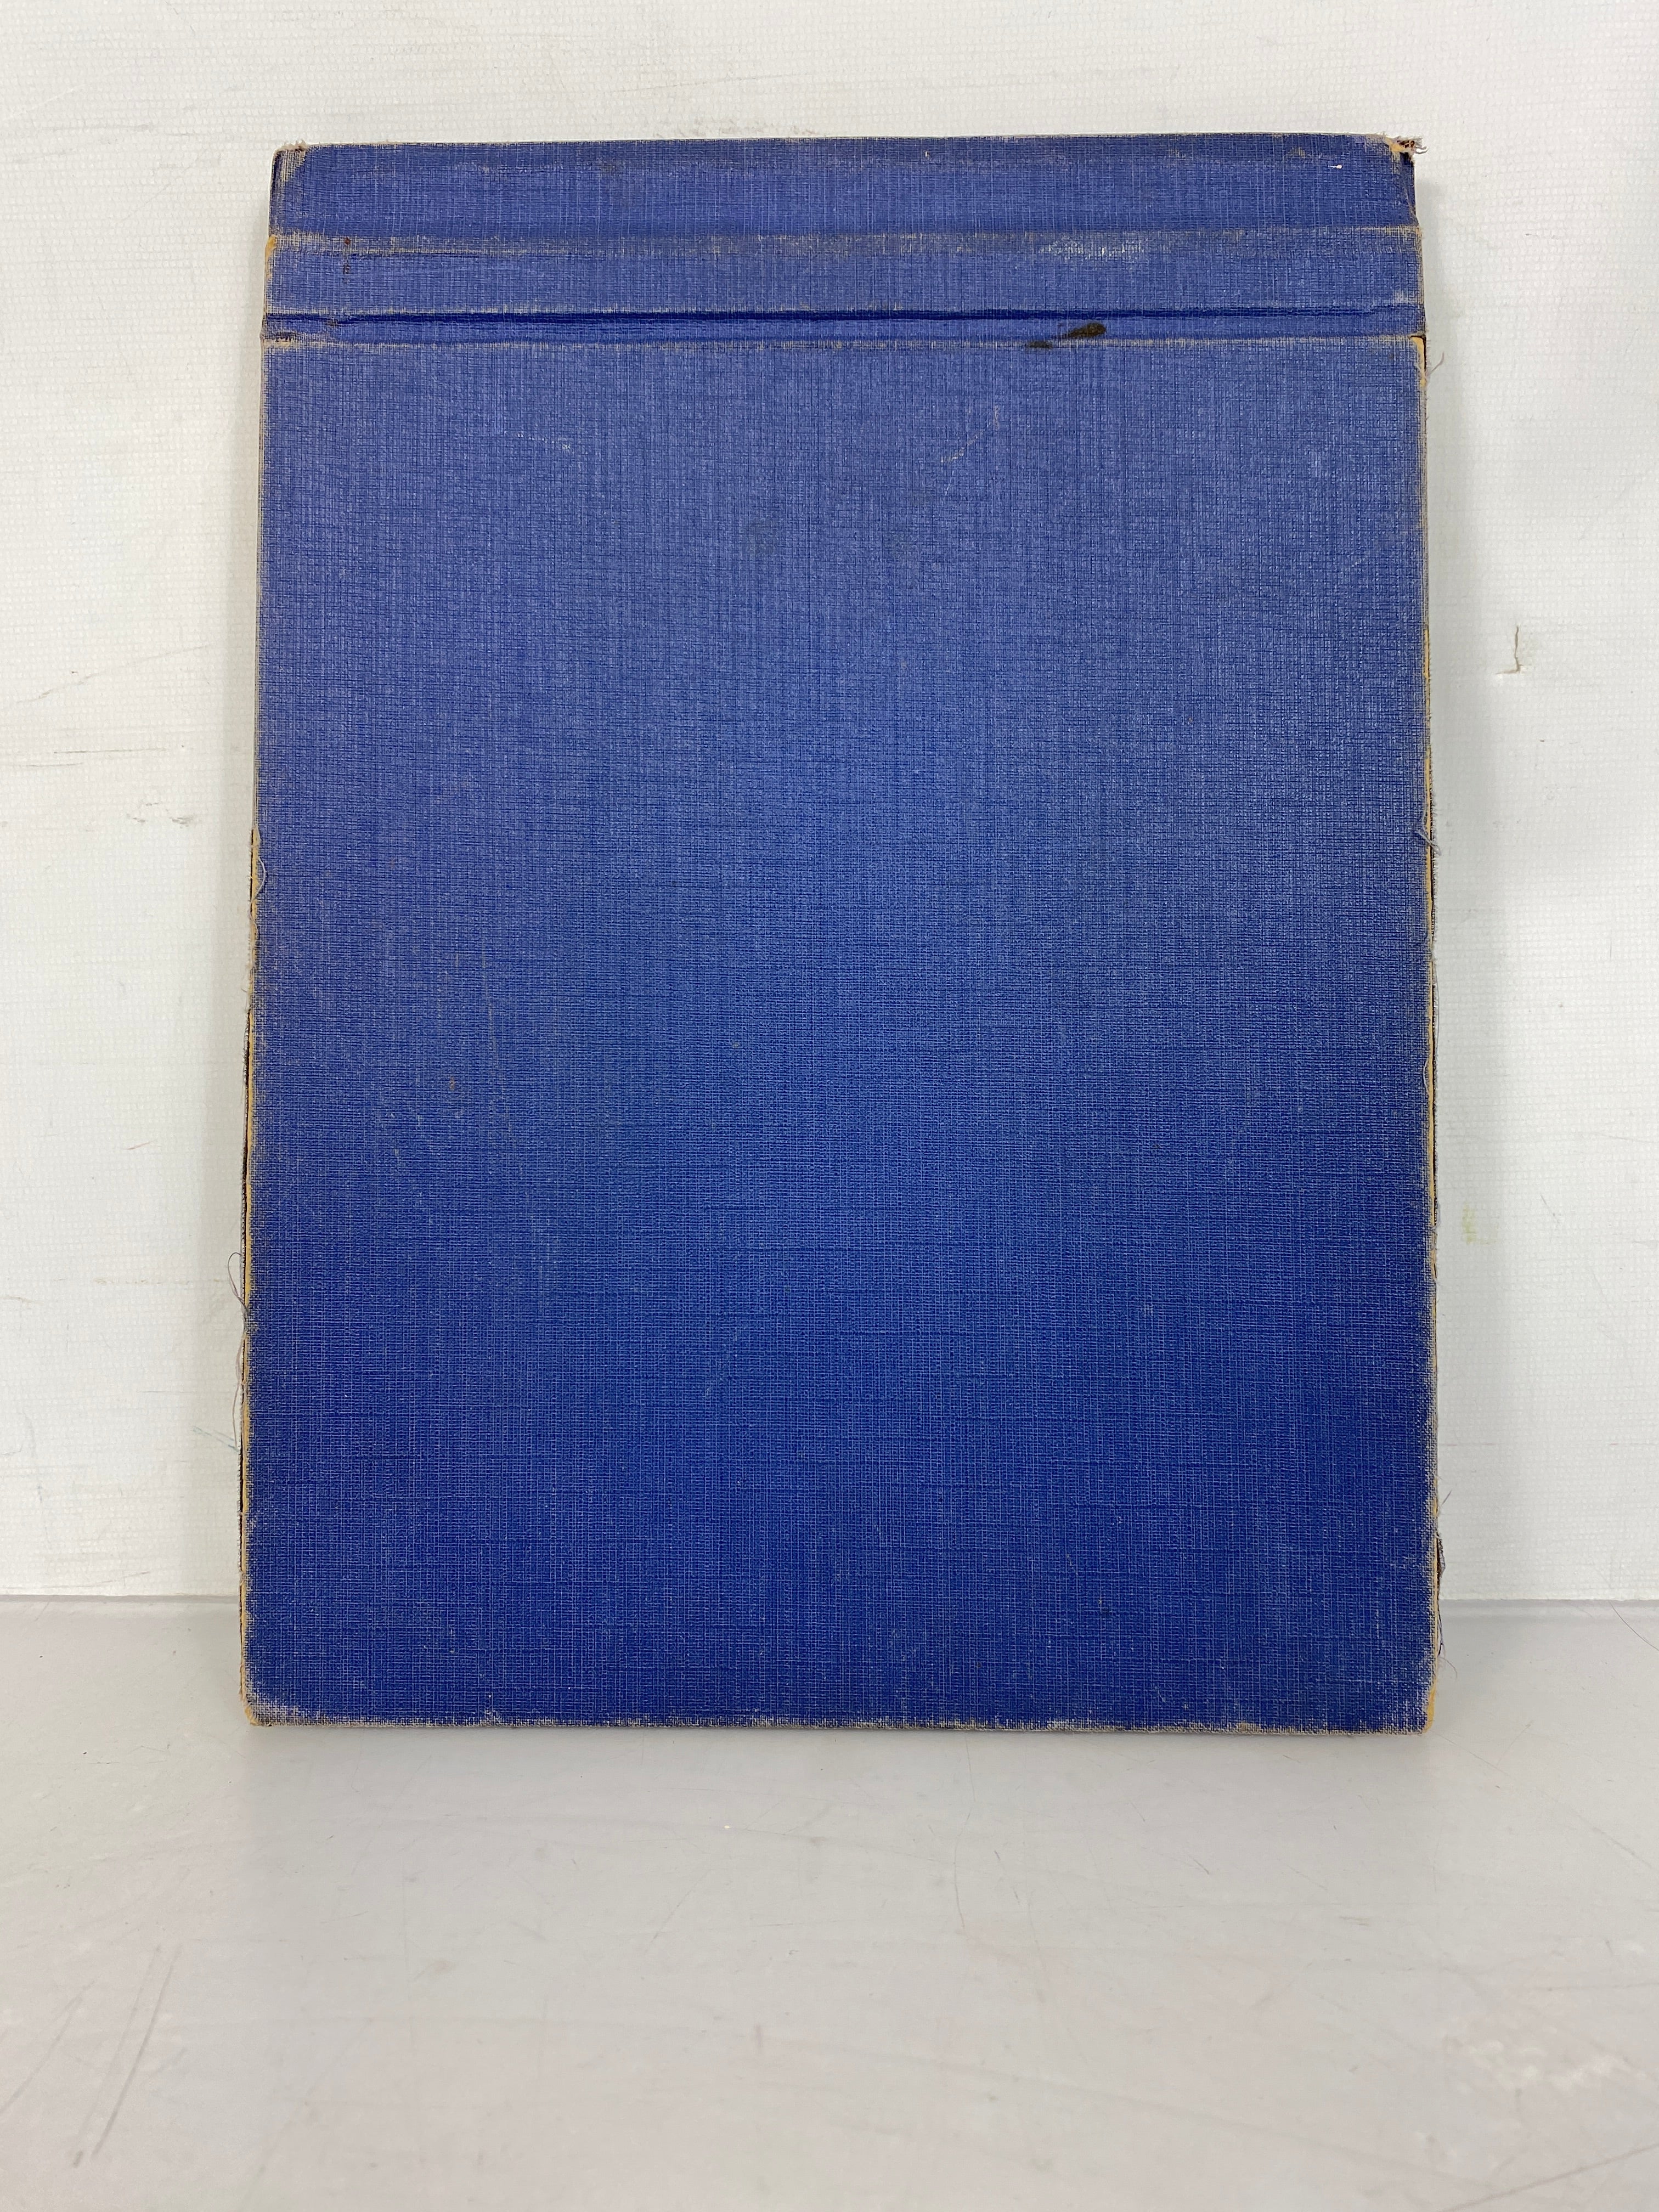 Lansing Business University College Typing by Fisher, White, and Reigner 1936 HC